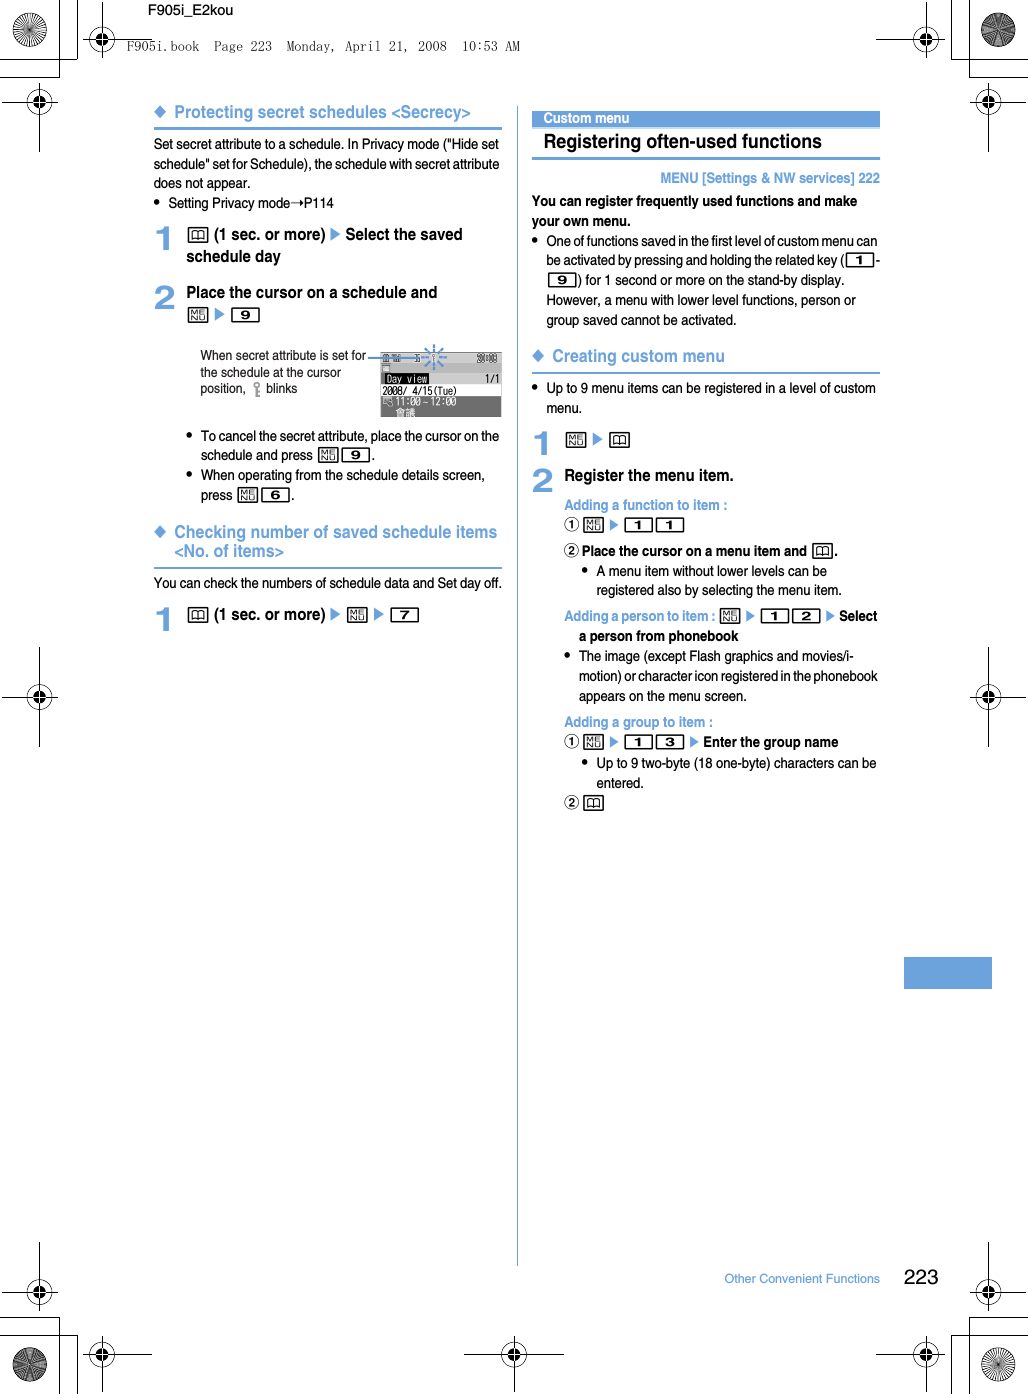 223Other Convenient FunctionsF905i_E2kou◆Protecting secret schedules &lt;Secrecy&gt;Set secret attribute to a schedule. In Privacy mode (&quot;Hide set schedule&quot; set for Schedule), the schedule with secret attribute does not appear.•Setting Privacy mode➝P1141p (1 sec. or more)eSelect the saved schedule day2Place the cursor on a schedule and me9•To cancel the secret attribute, place the cursor on the schedule and press m9.•When operating from the schedule details screen, press m6.◆Checking number of saved schedule items &lt;No. of items&gt;You can check the numbers of schedule data and Set day off.1p (1 sec. or more)eme7Custom menuRegistering often-used functionsMENU [Settings &amp; NW services] 222You can register frequently used functions and make your own menu.•One of functions saved in the first level of custom menu can be activated by pressing and holding the related key (1-9) for 1 second or more on the stand-by display. However, a menu with lower level functions, person or group saved cannot be activated.◆Creating custom menu•Up to 9 menu items can be registered in a level of custom menu.1mep2Register the menu item.Adding a function to item : ame11bPlace the cursor on a menu item and p.•A menu item without lower levels can be registered also by selecting the menu item.Adding a person to item : me12eSelect a person from phonebook•The image (except Flash graphics and movies/i-motion) or character icon registered in the phonebook appears on the menu screen.Adding a group to item : ame13eEnter the group name•Up to 9 two-byte (18 one-byte) characters can be entered.bpWhen secret attribute is set for the schedule at the cursor position,      blinksF905i.book  Page 223  Monday, April 21, 2008  10:53 AM